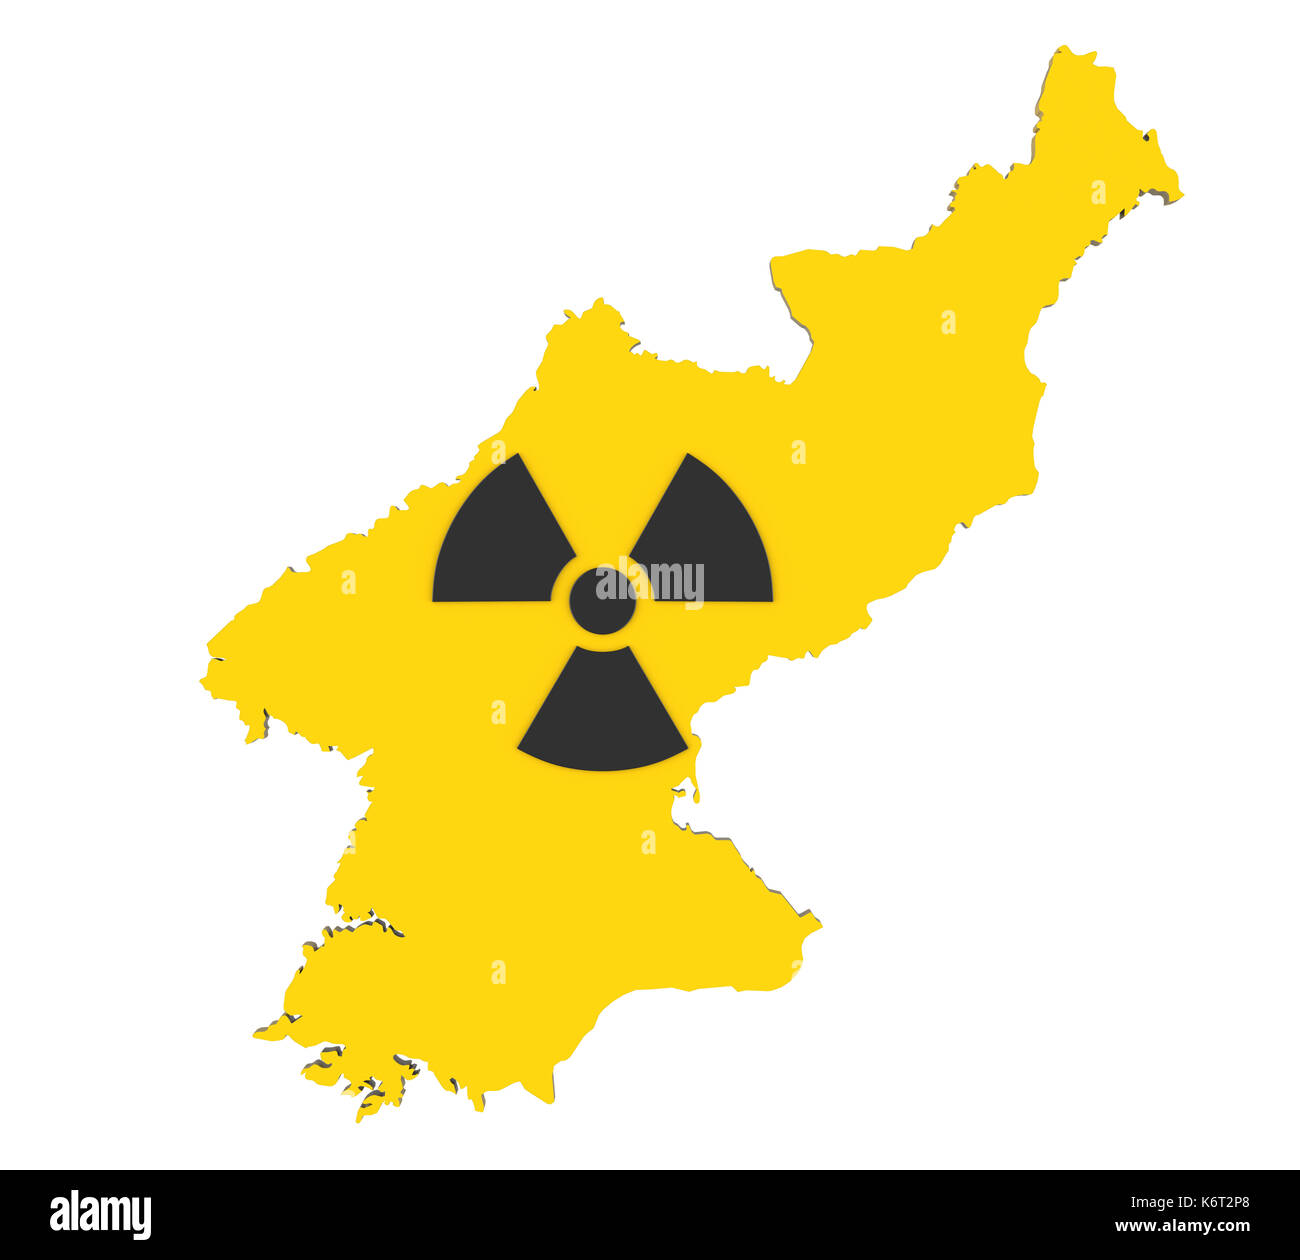 North Korea Map with Nuclear Sign Stock Photo